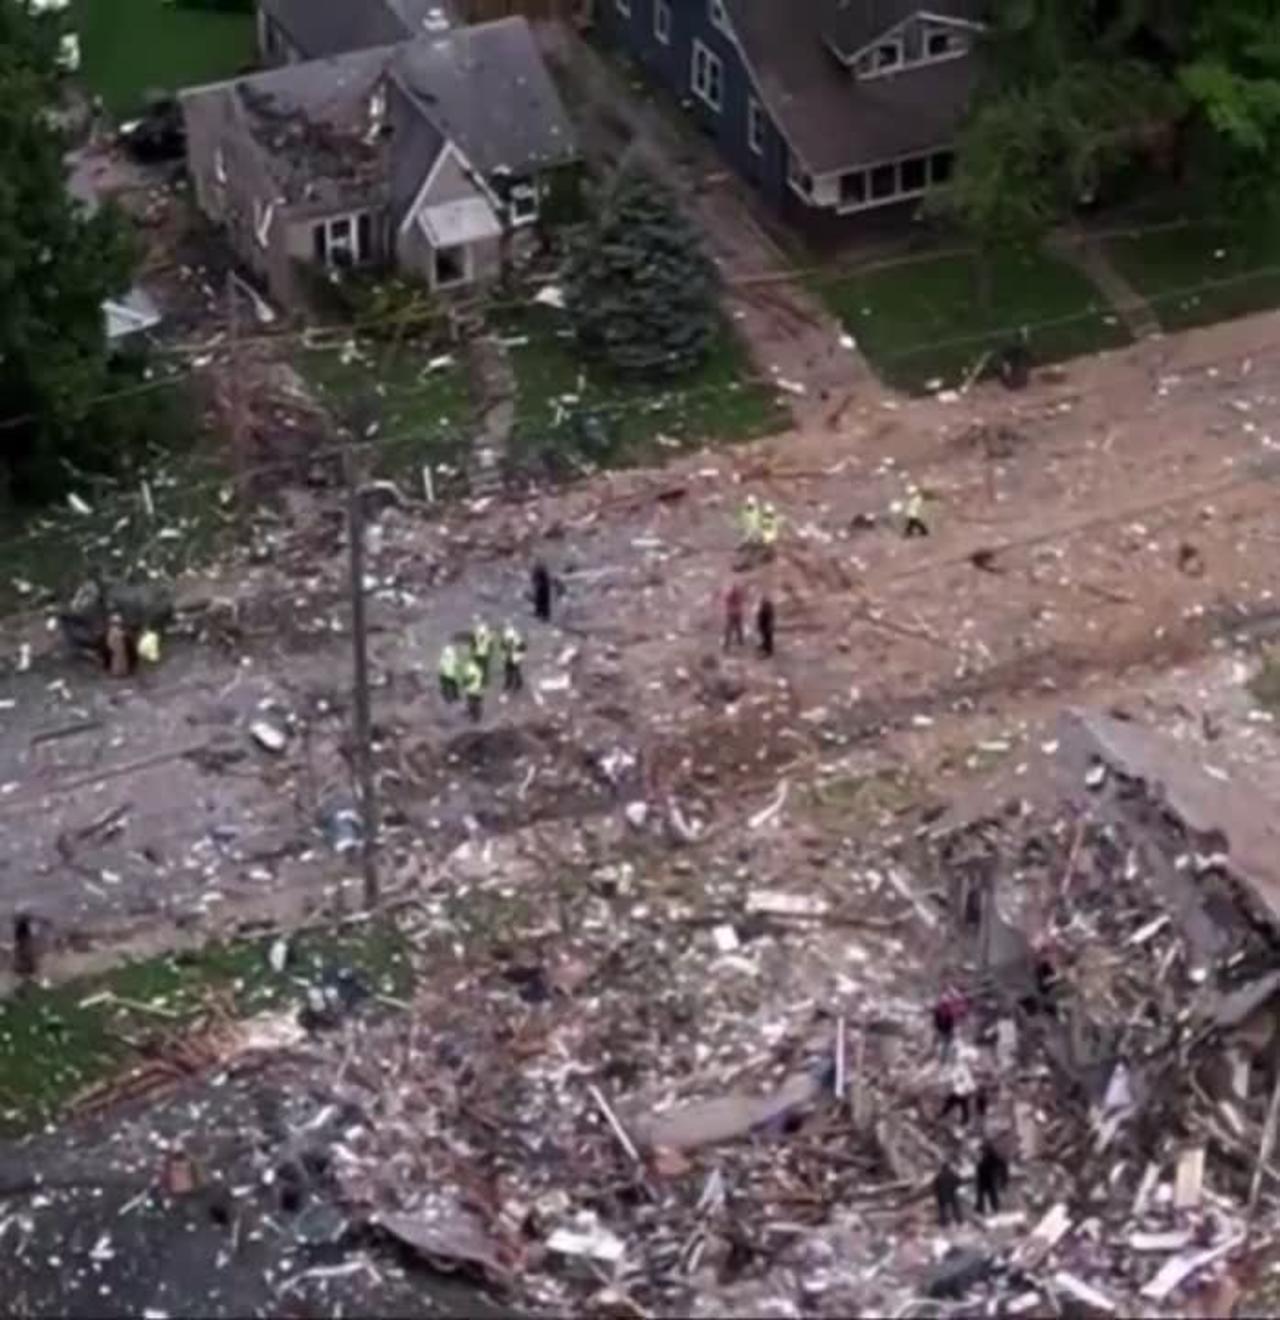 Large house Explosion with 40+ homes damaged in Evansville, Indiana , 3 dead